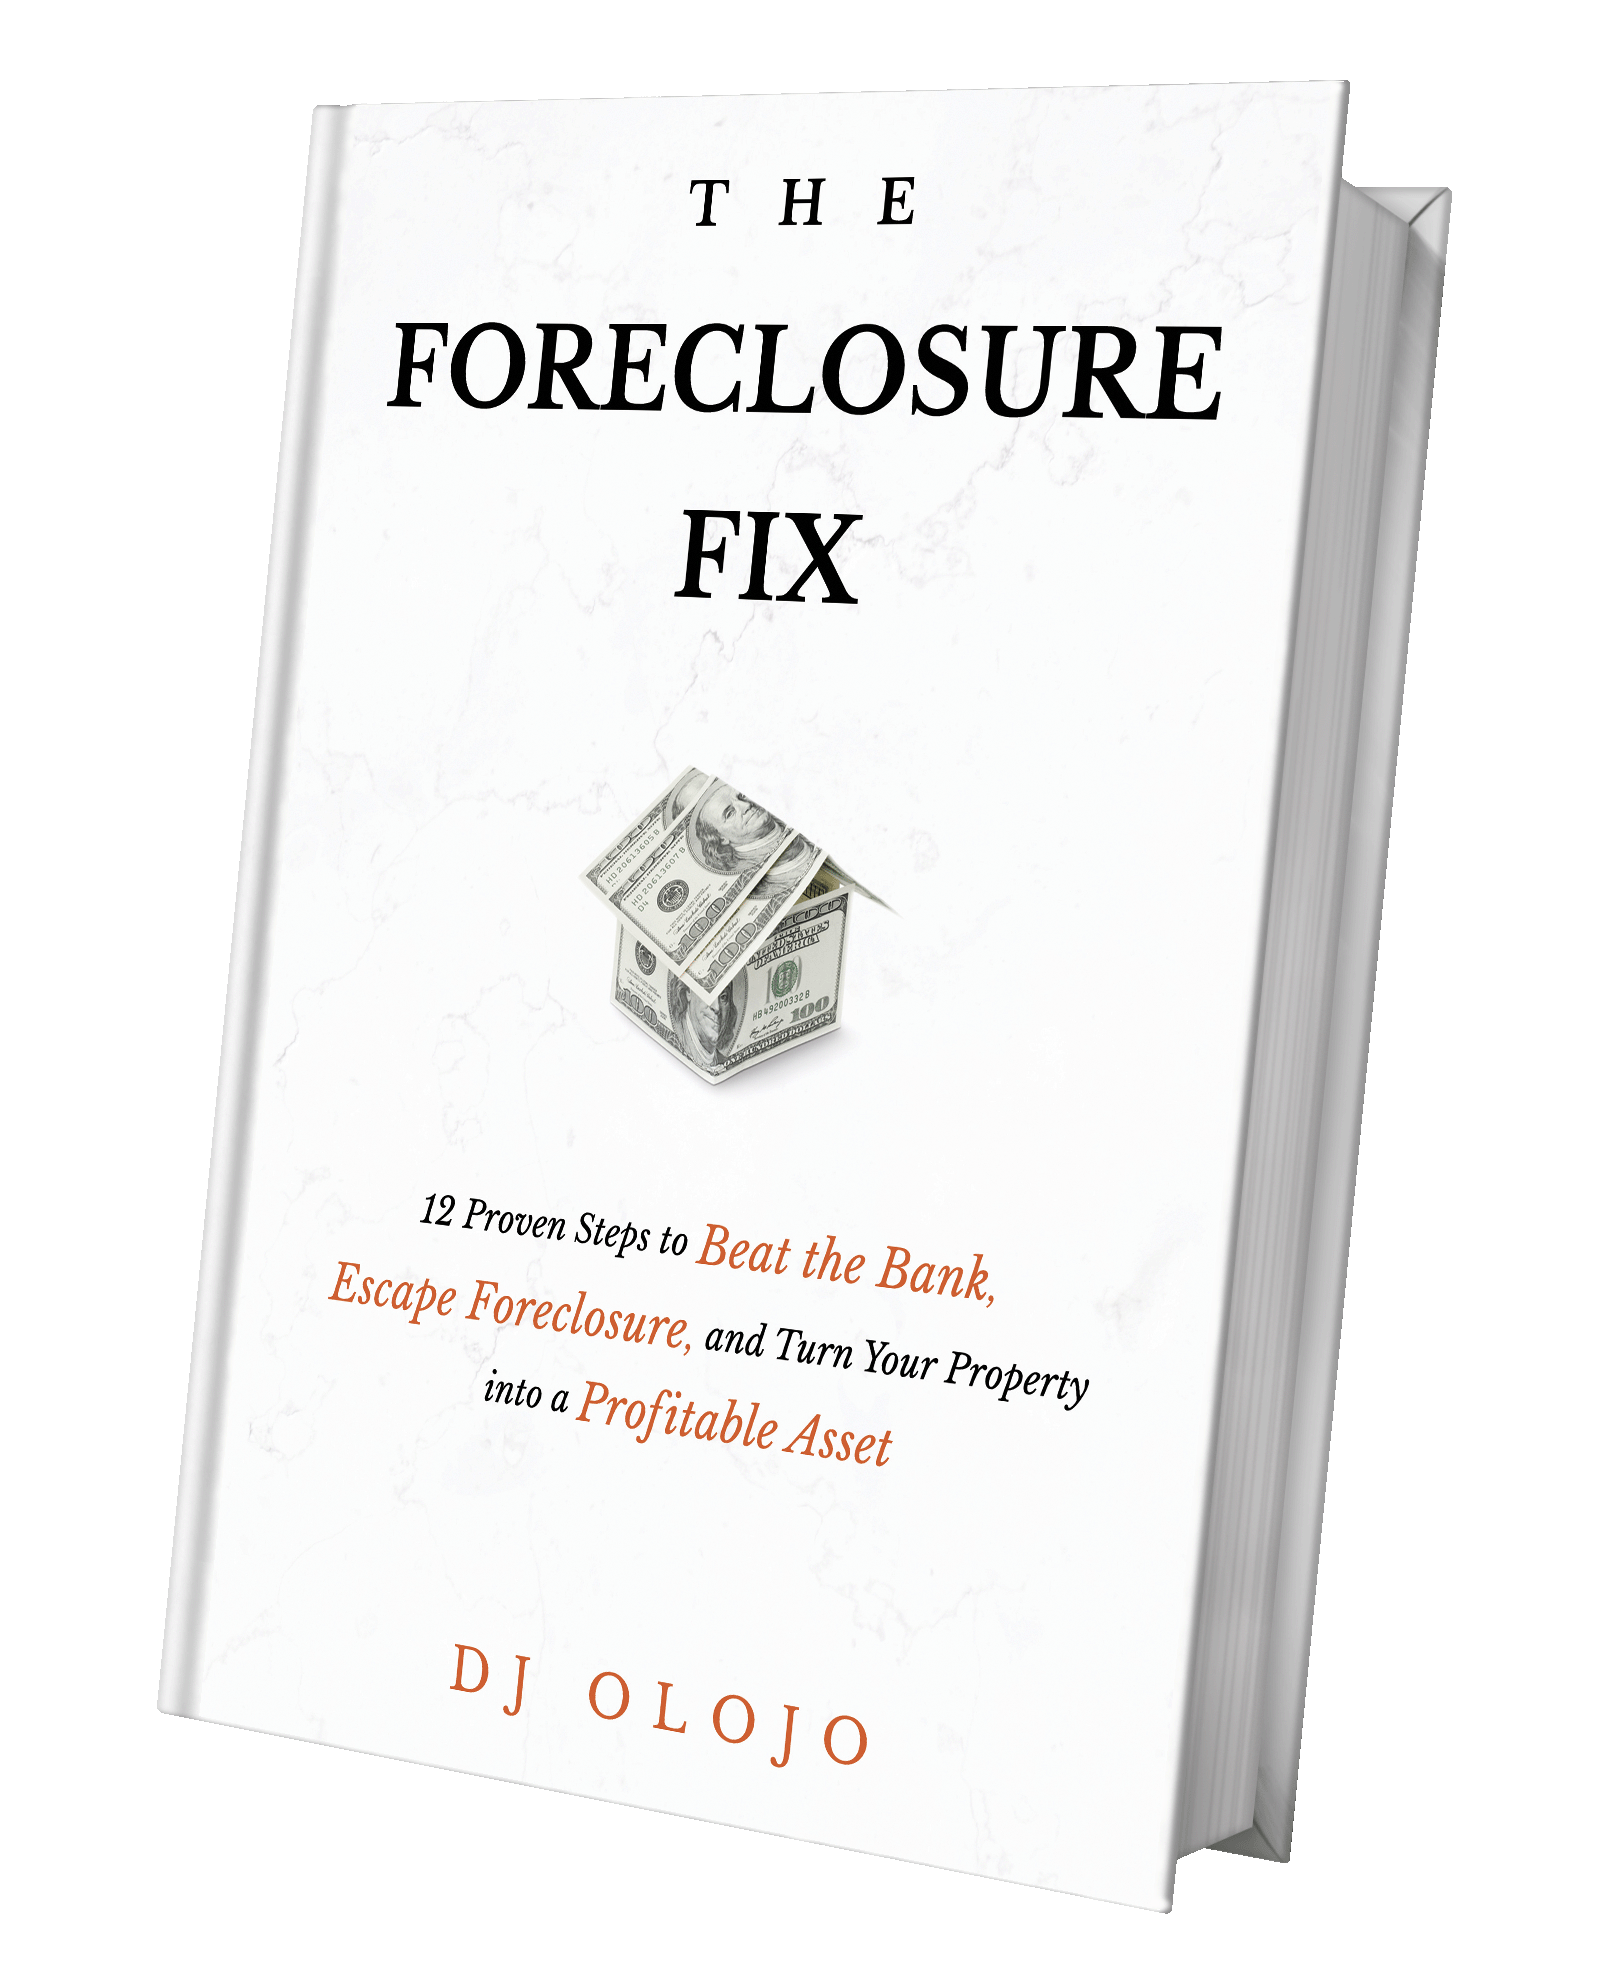 Helping 1 Million Americans Navigate Foreclosure Successfully